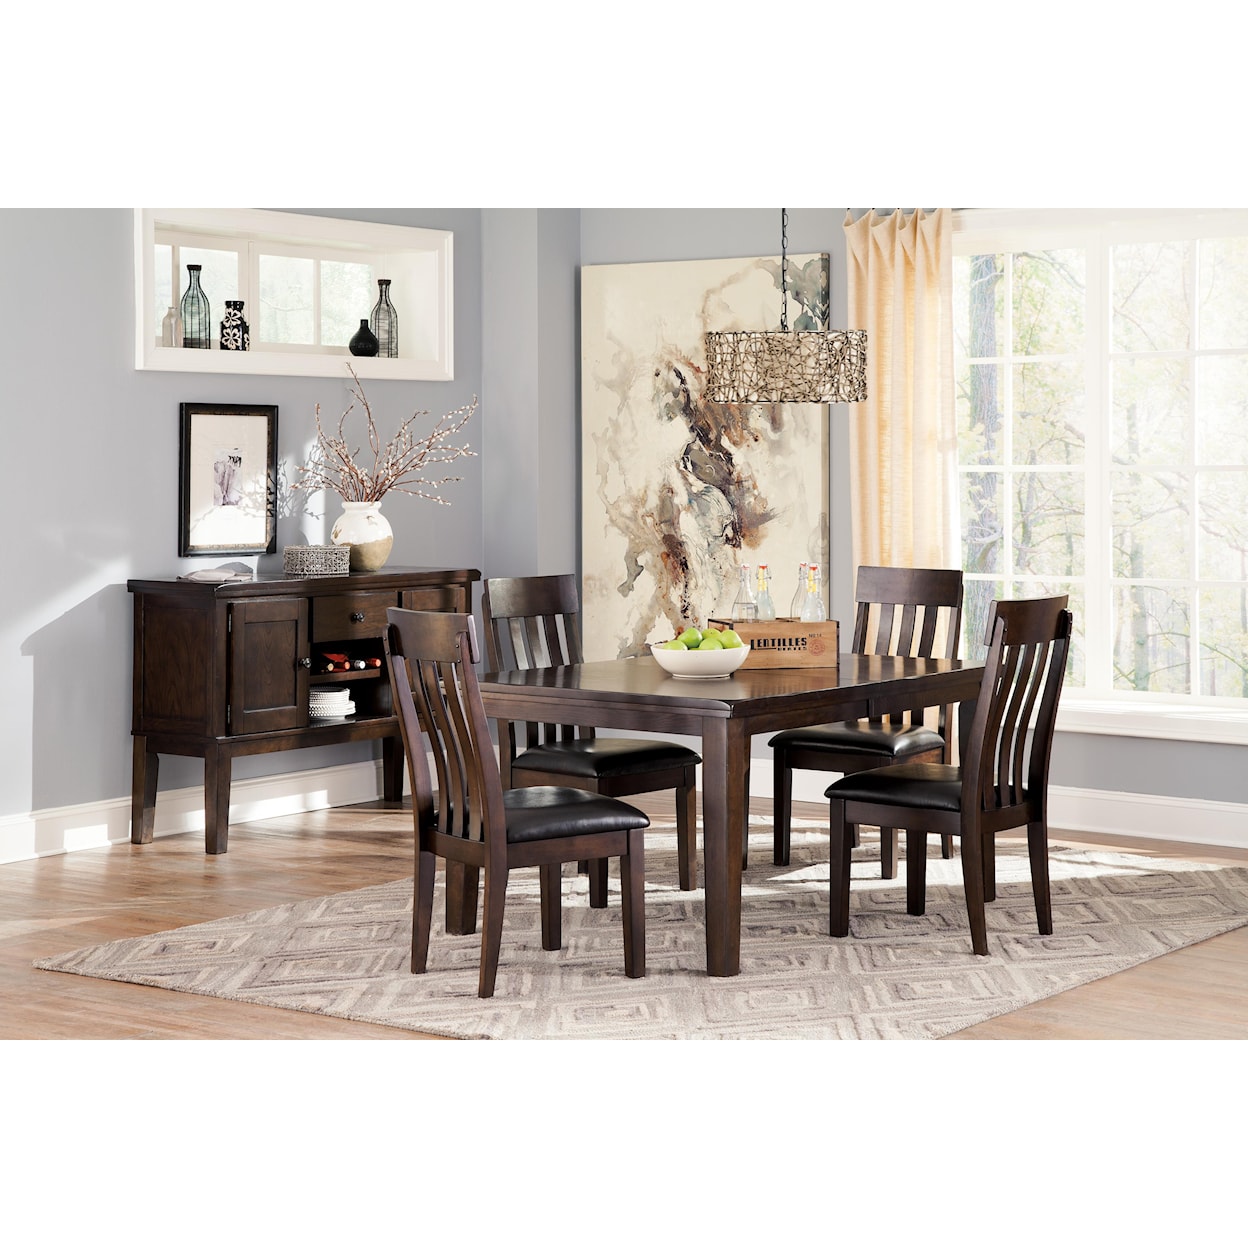 Signature Design by Ashley Haddigan 5-Piece Dining Room Table & Side Chair Set